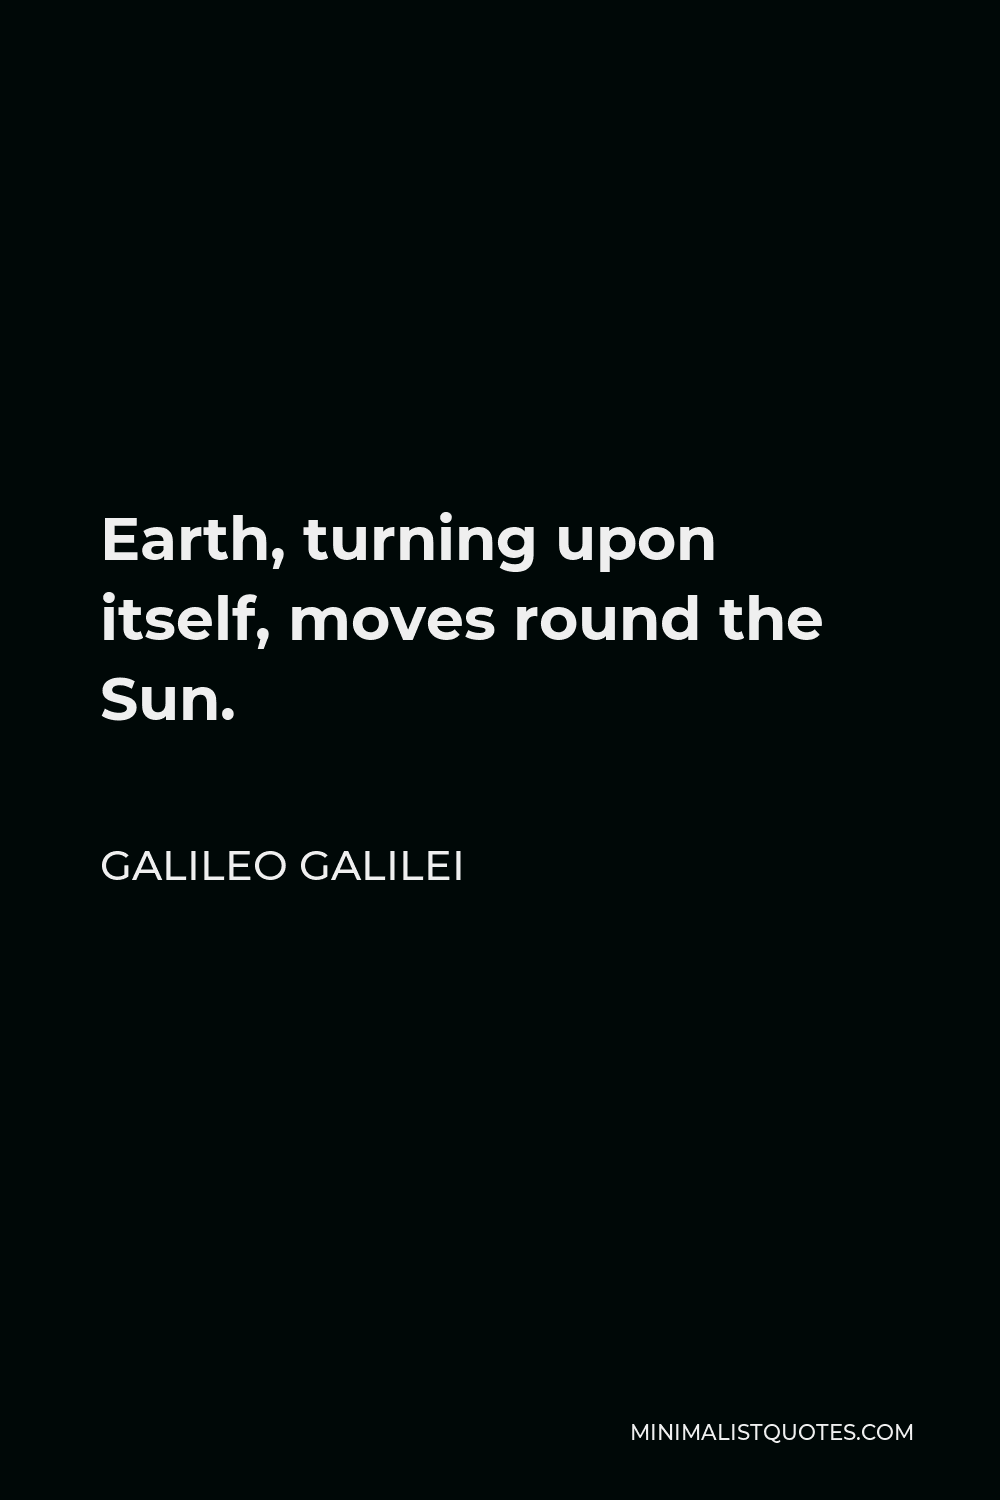 Galileo Galilei Quote - Earth, turning upon itself, moves round the Sun.